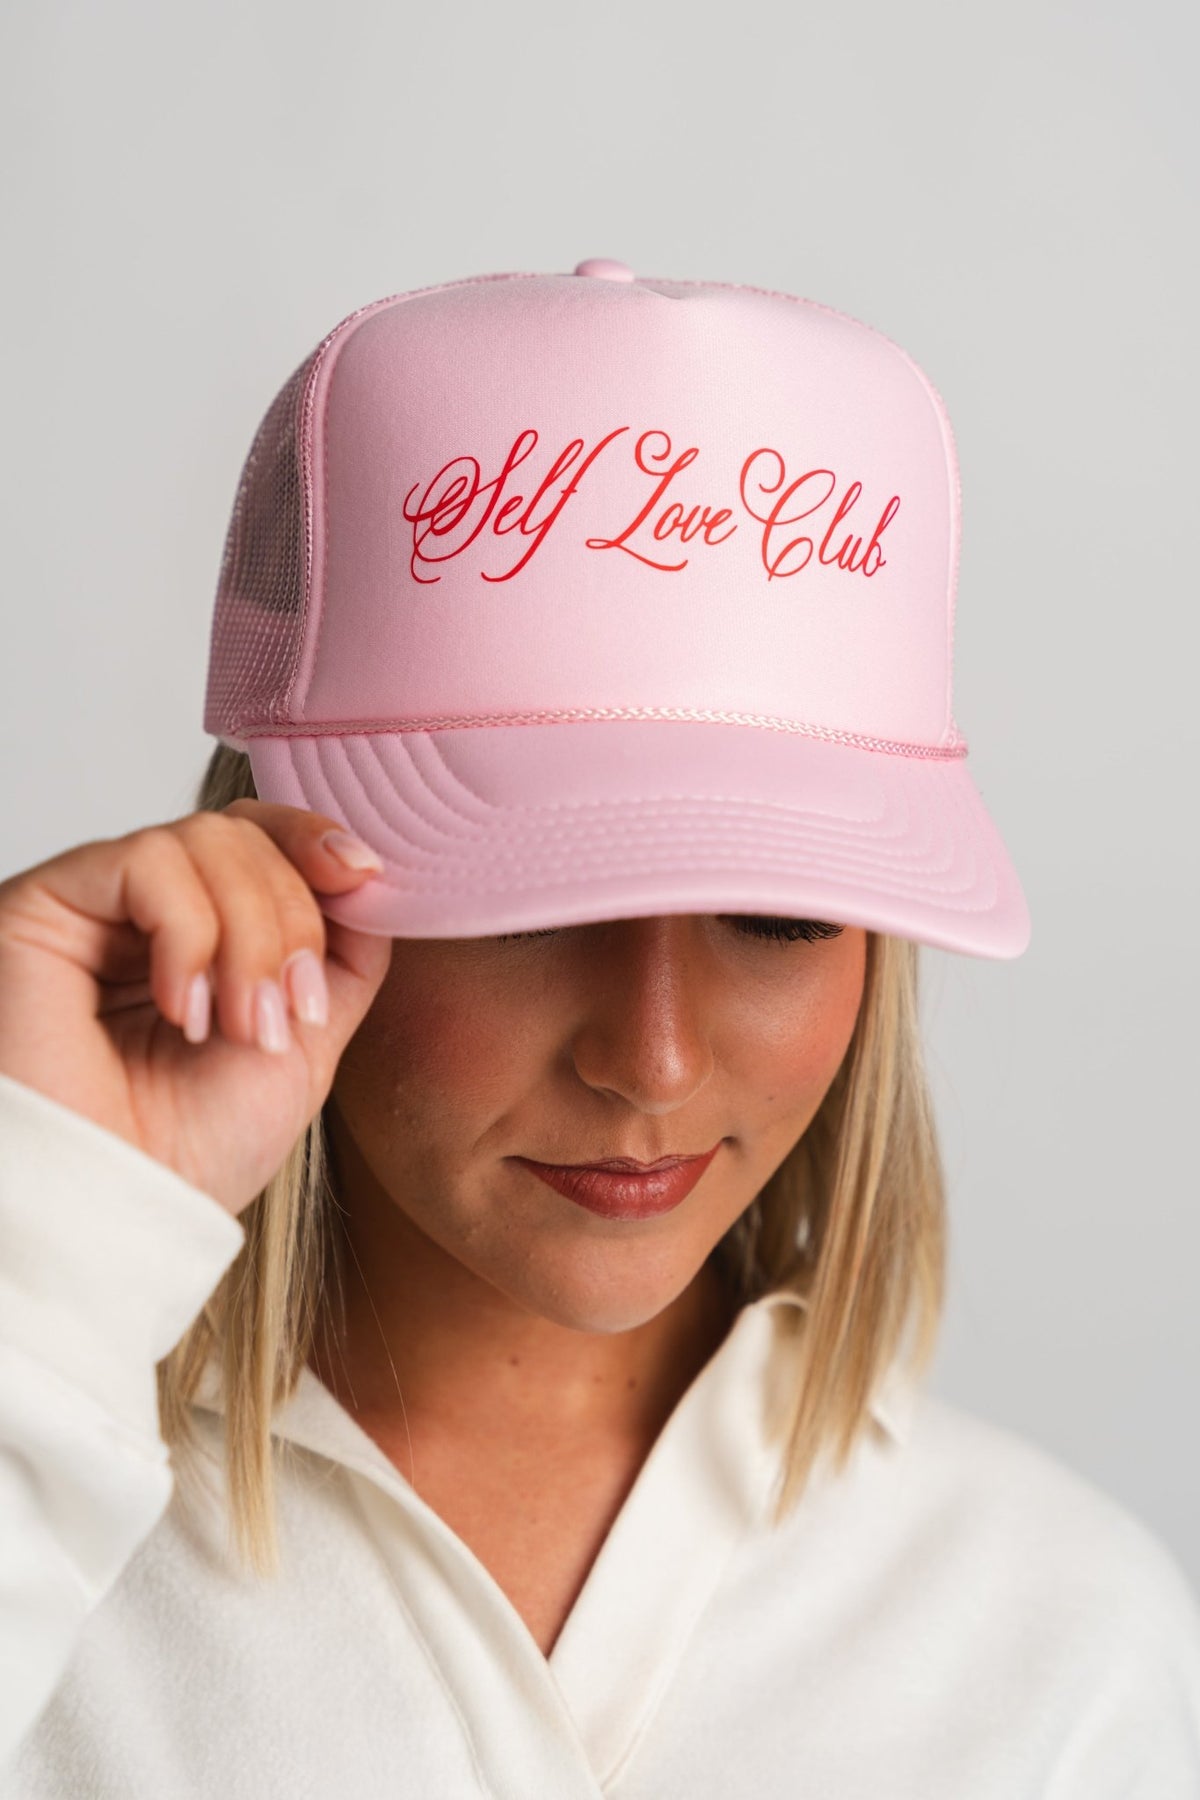 Self love club trucker hat light pink - Trendy T-Shirts for Valentine's Day at Lush Fashion Lounge Boutique in Oklahoma City